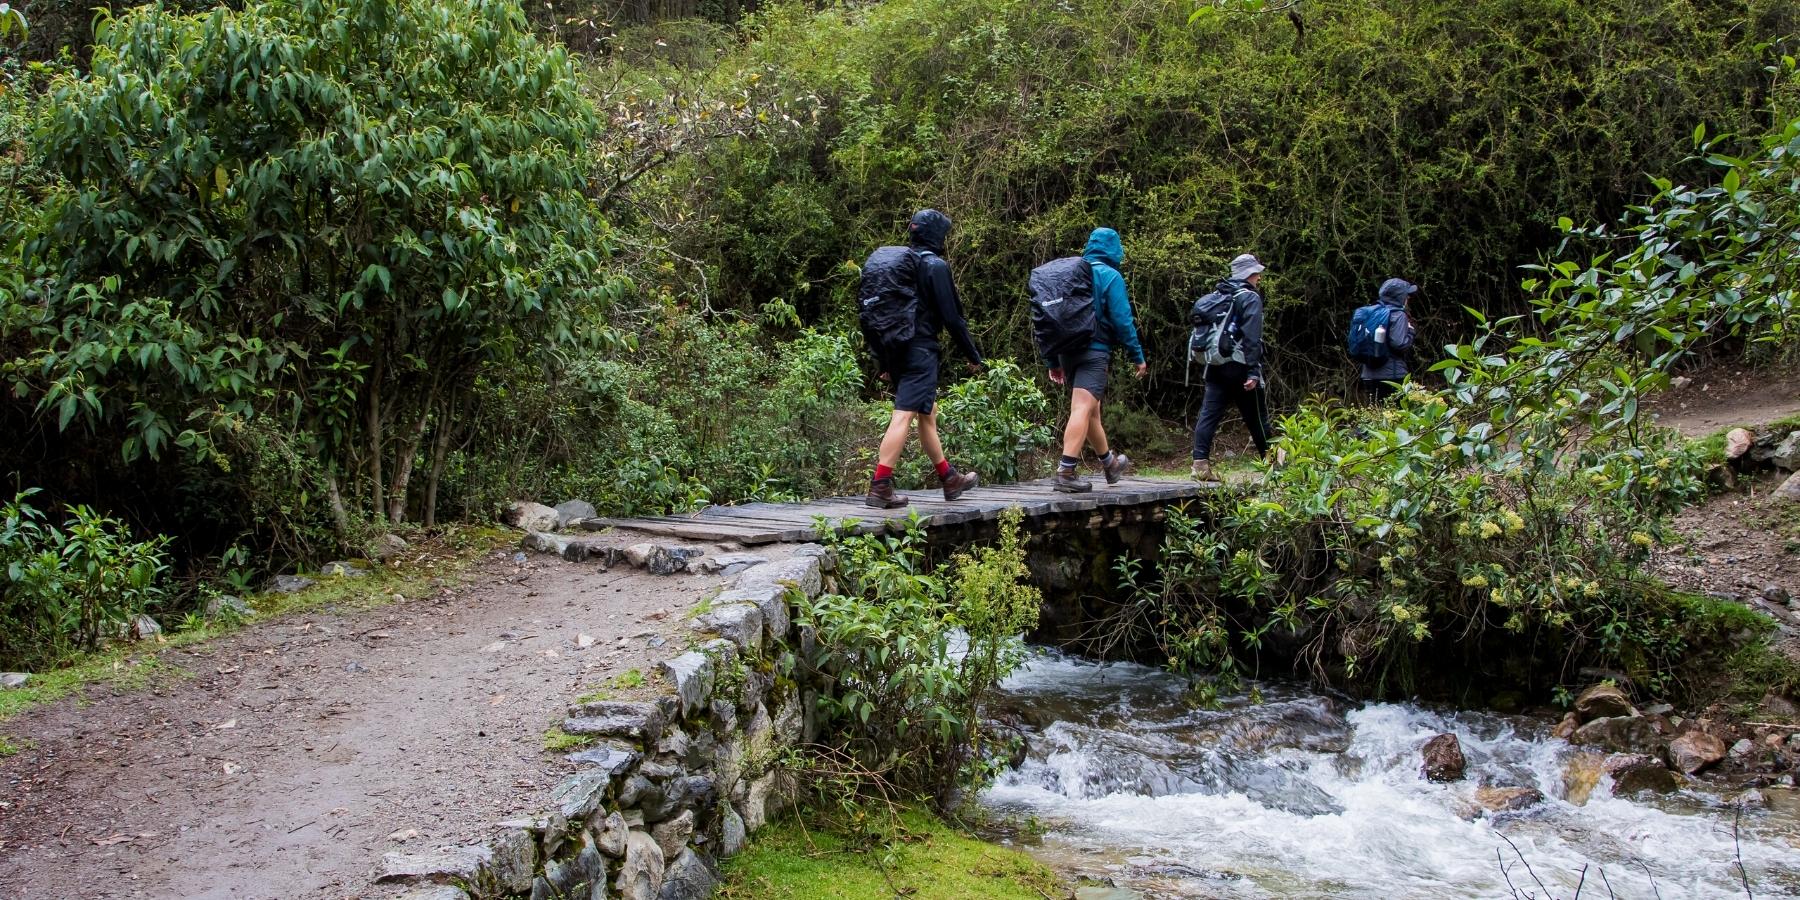 luxury inca trail to machu picchu by inca trail expeditions (5)